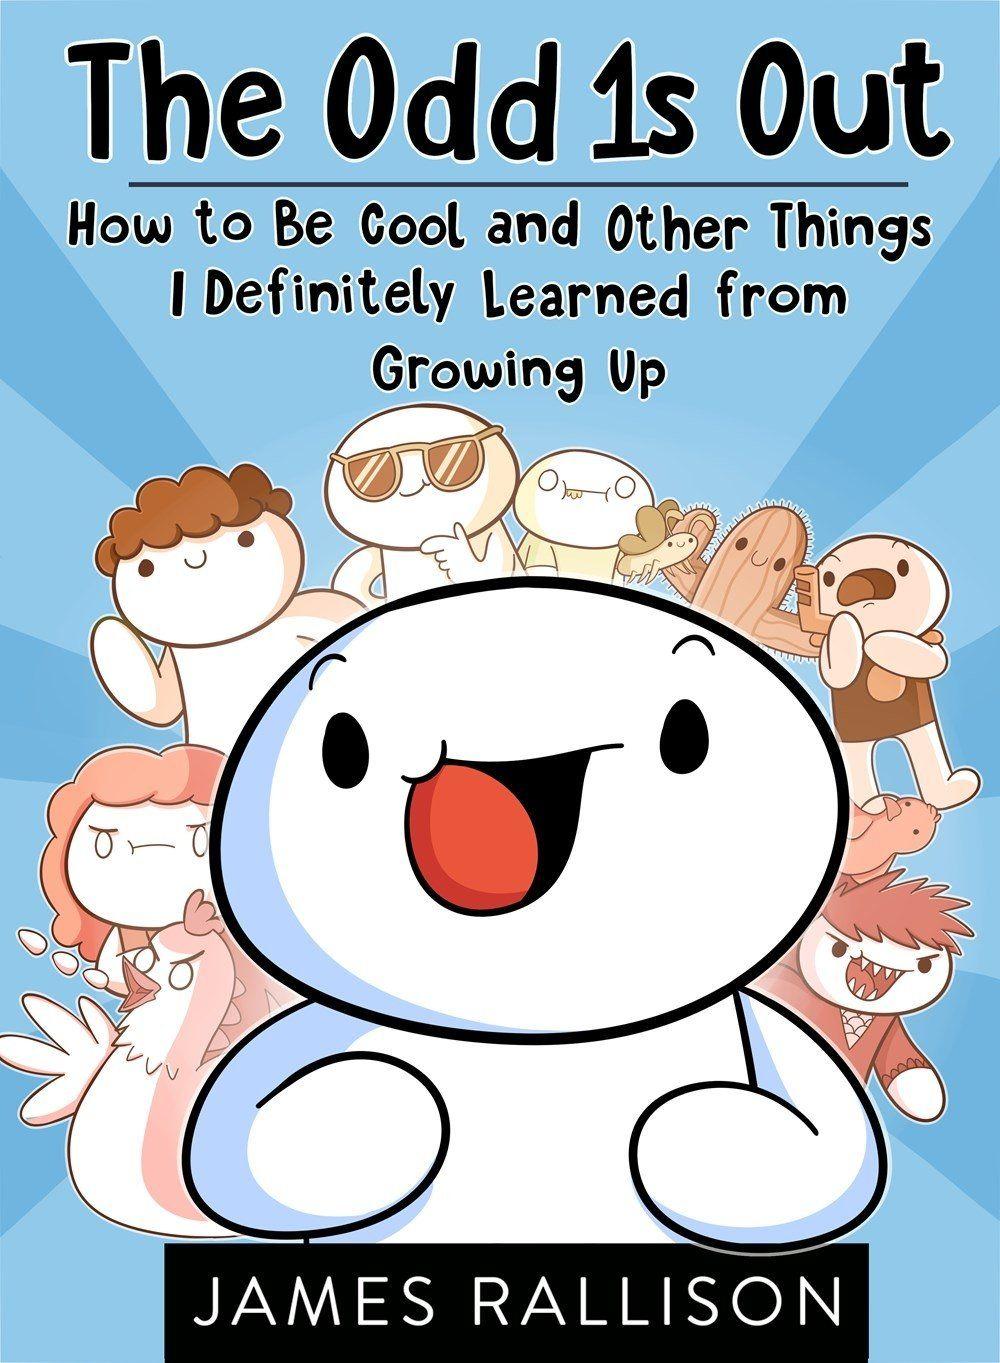 The Odd 1s Out: How to Be Cool and Other Things I